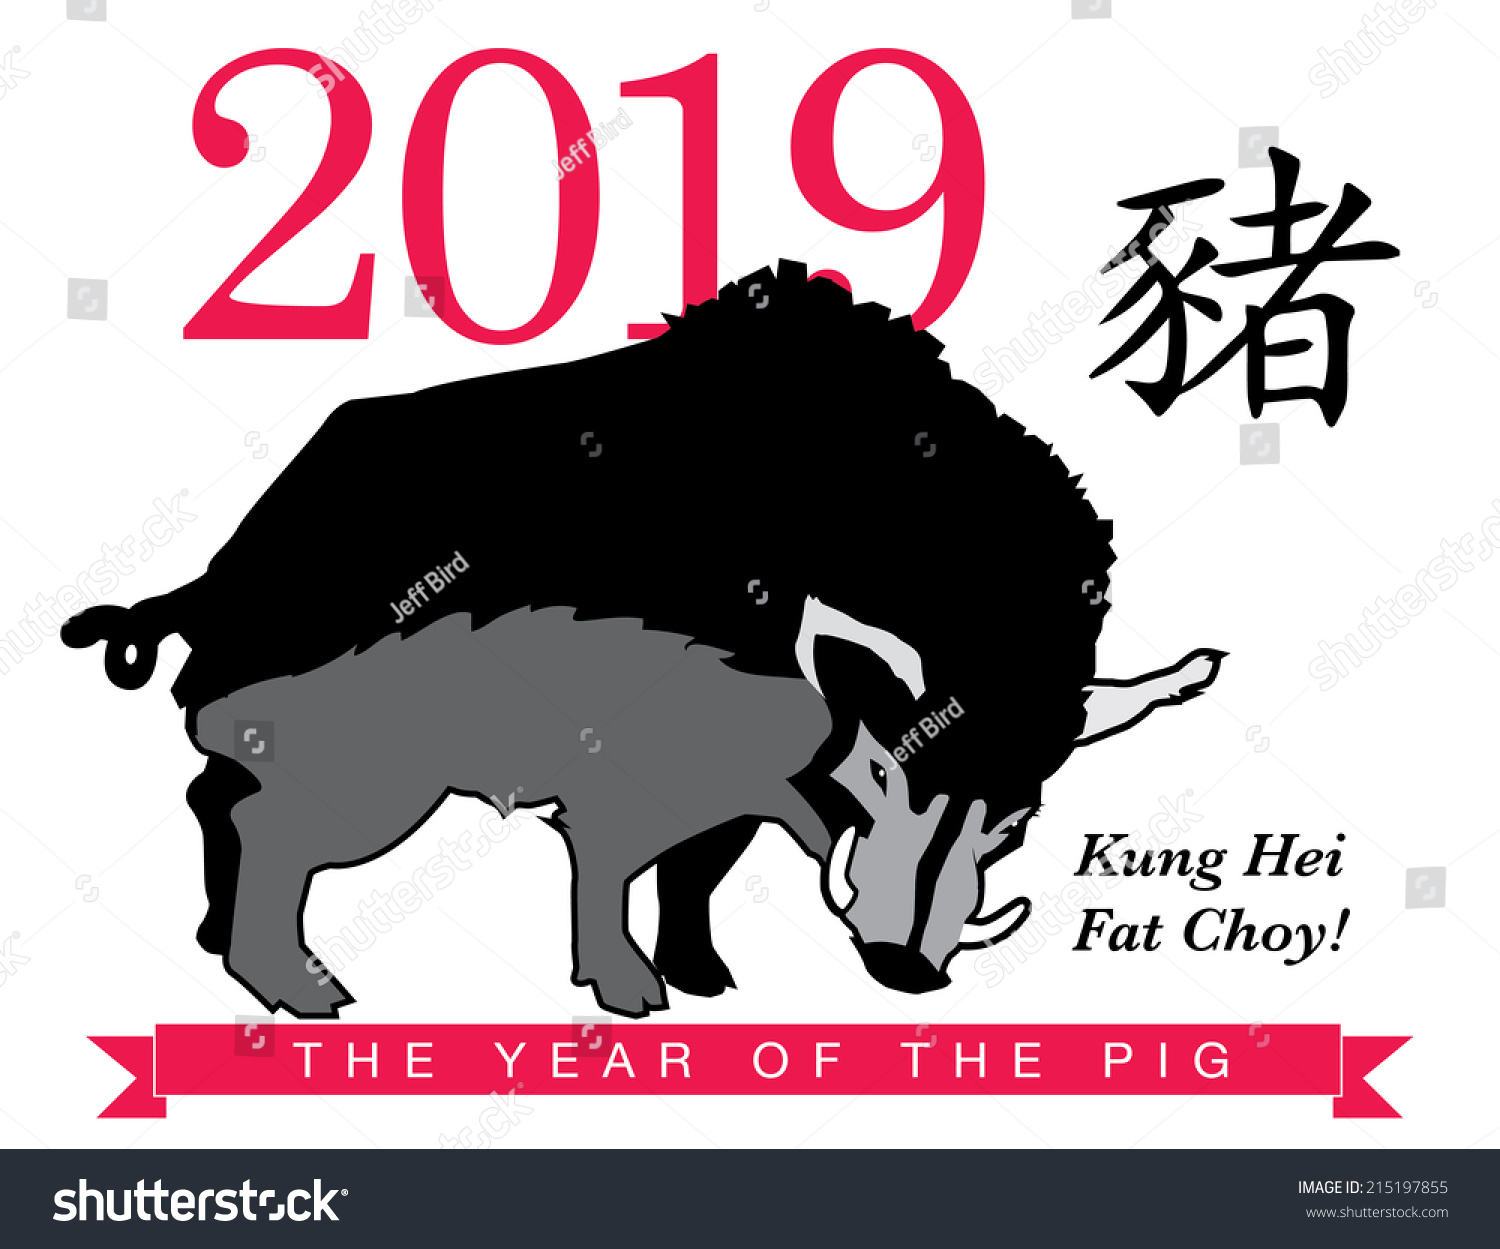 stock-vector-vector-illustration-of-chinese-astrology-year-of-the-pig-boar-215197855.jpg